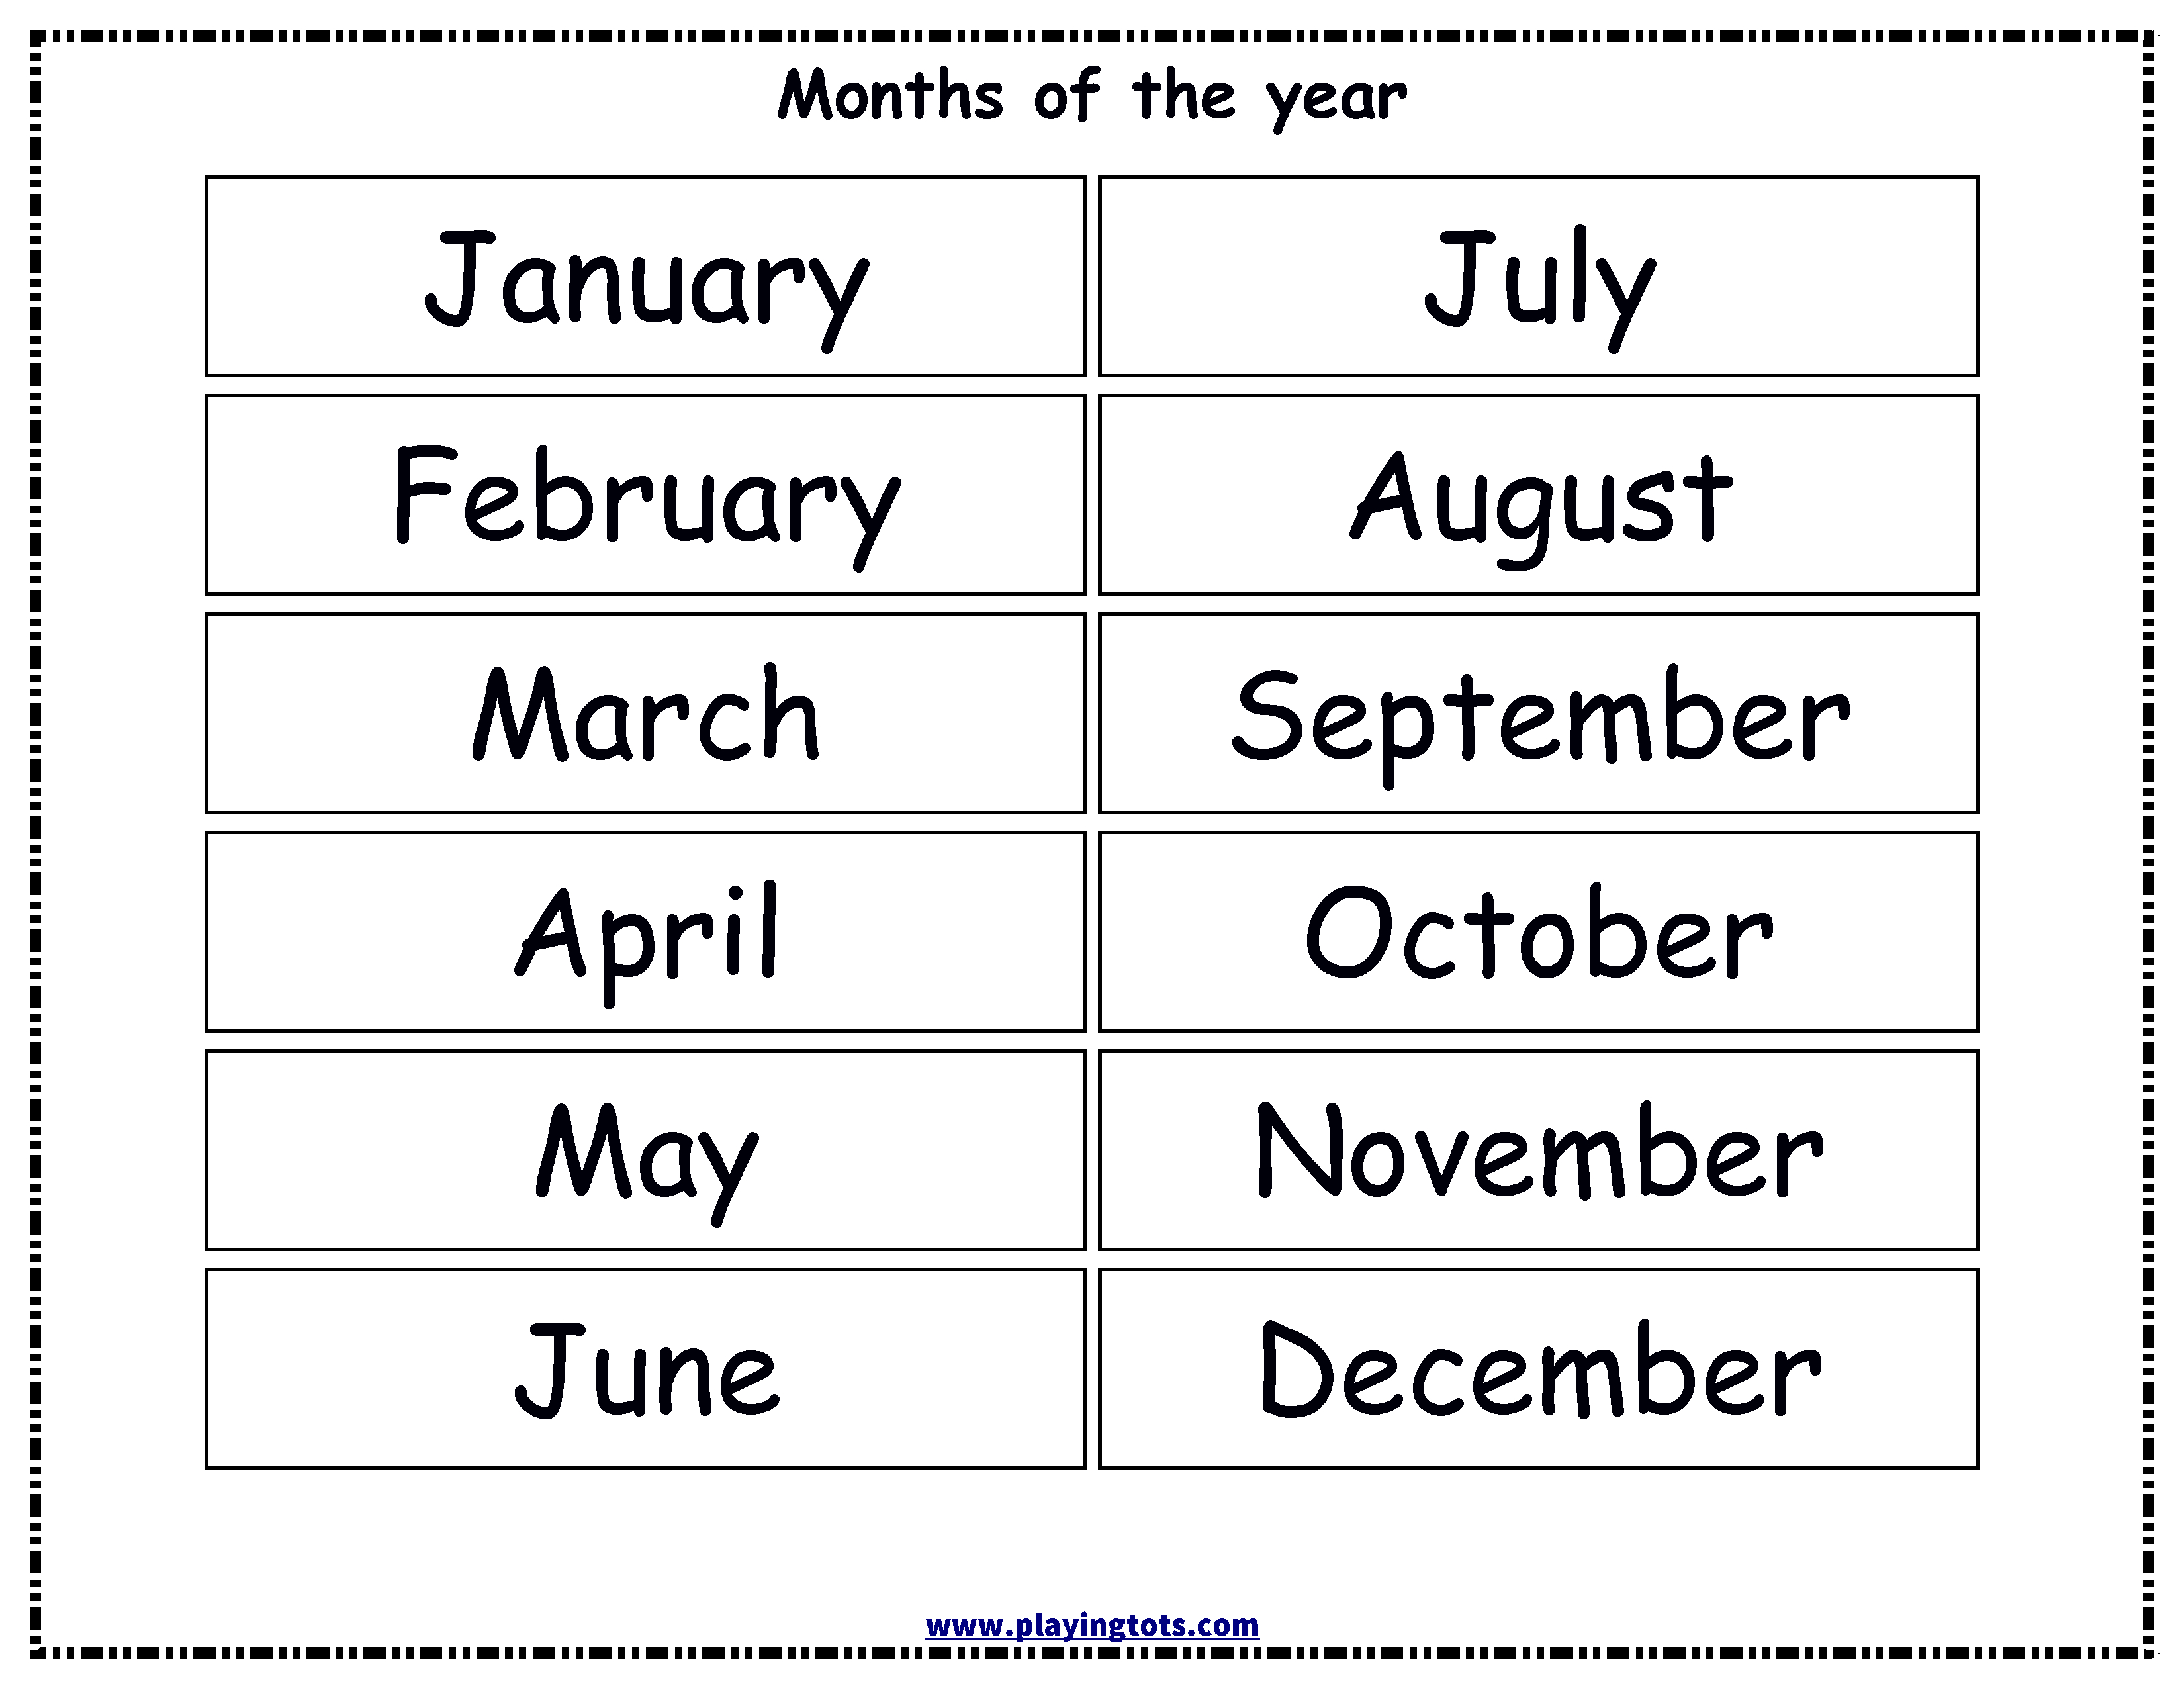 Free Printable Months Of The Year Chart | Alivia Learning Folder - Free Printable Months Of The Year Chart